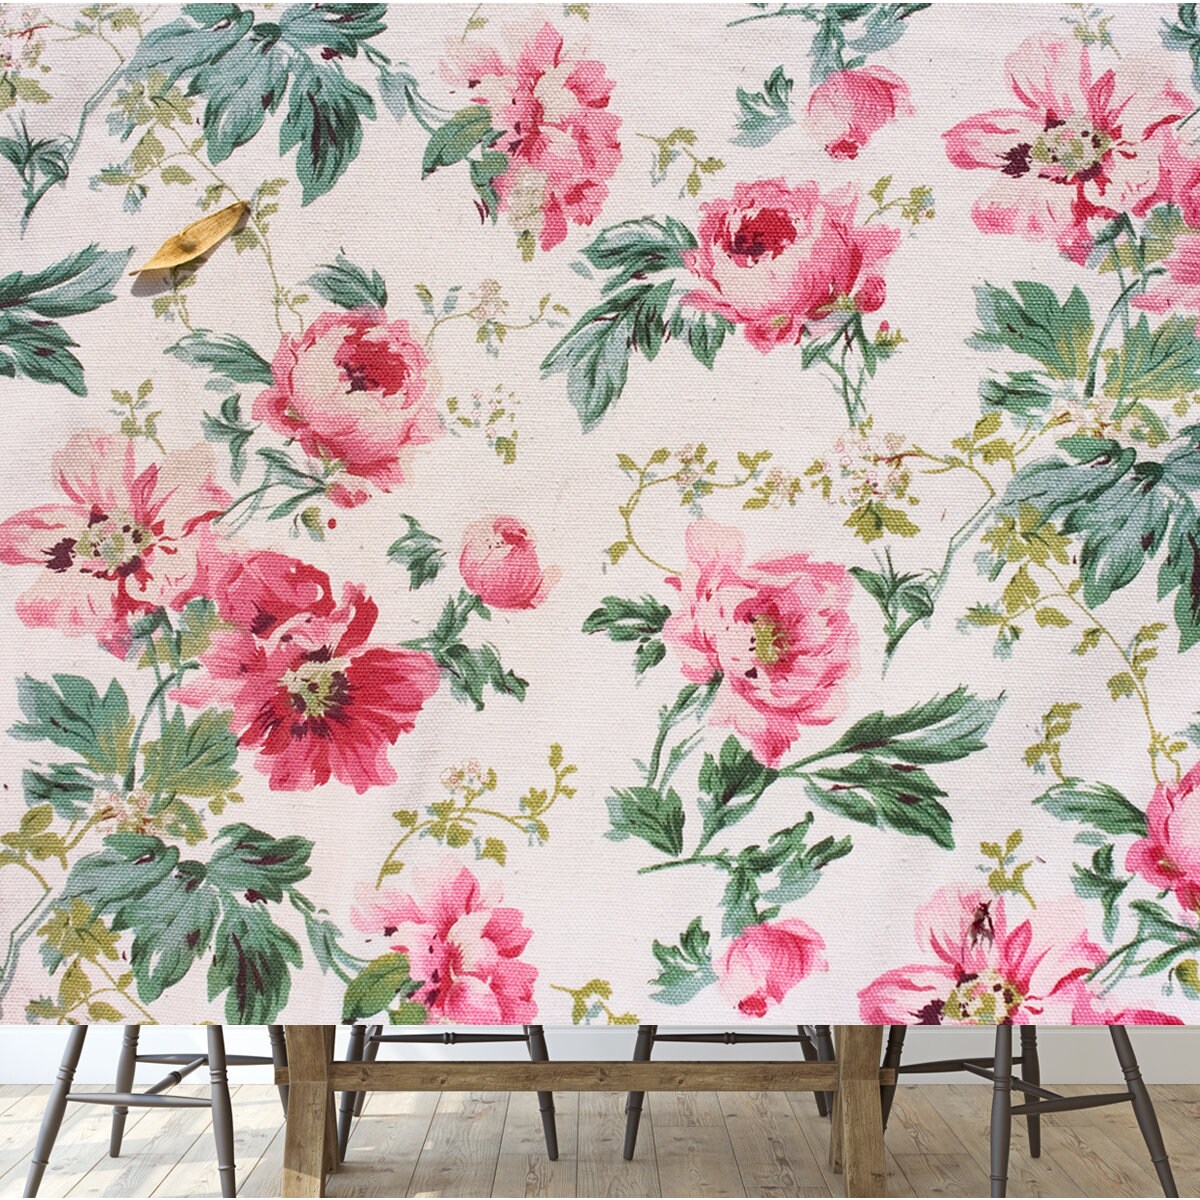 Fragment of Colorful Retro Tapestry Textile Pattern with Floral Ornament Wallpaper Dining Room Mural